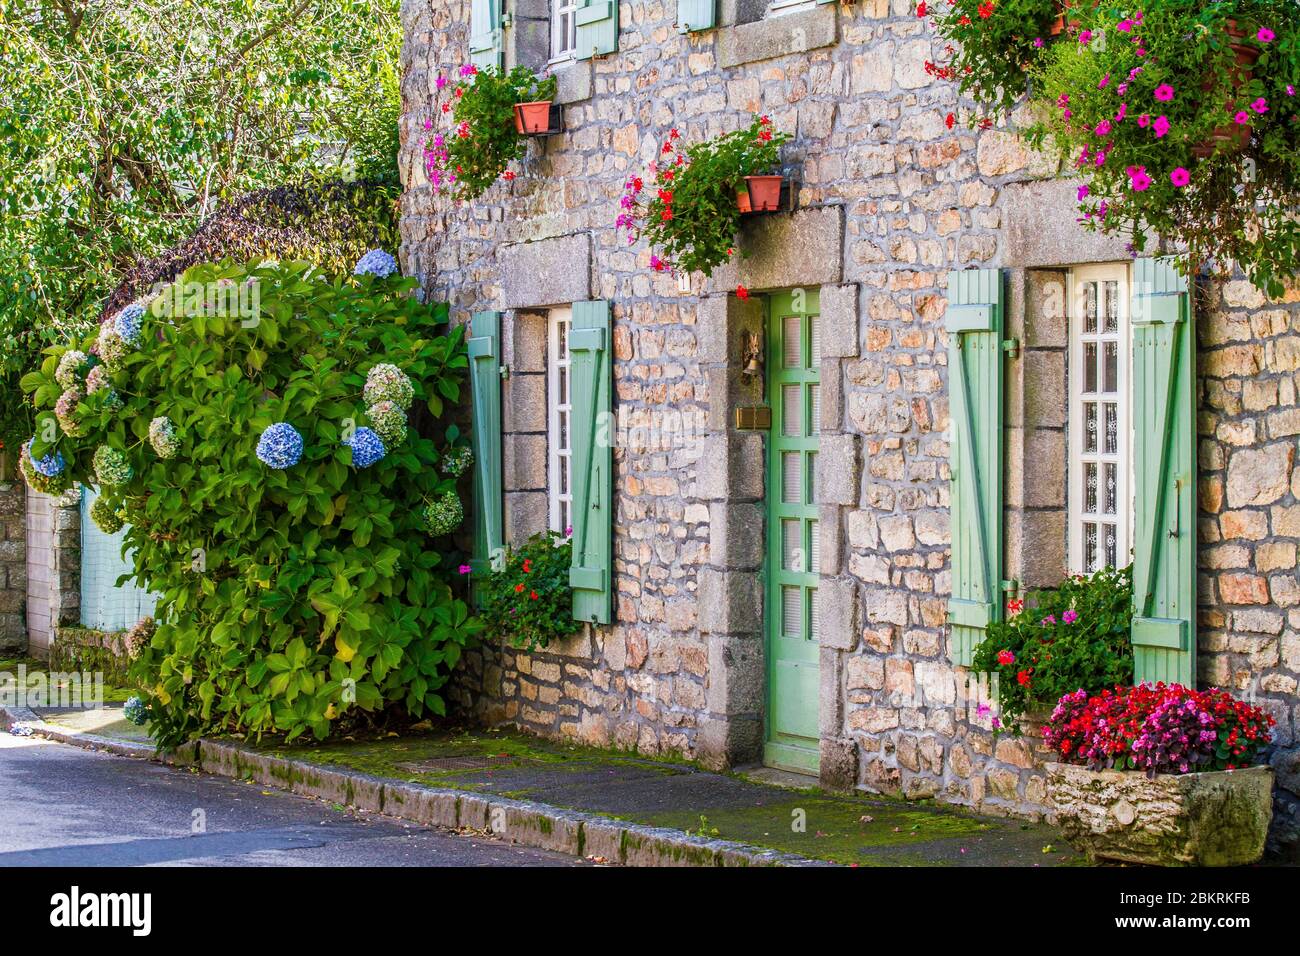 France, Morbihan, La Vraie Croix, Facade with green shutters of a flowered house with hydrangeas and geraniums Stock Photo